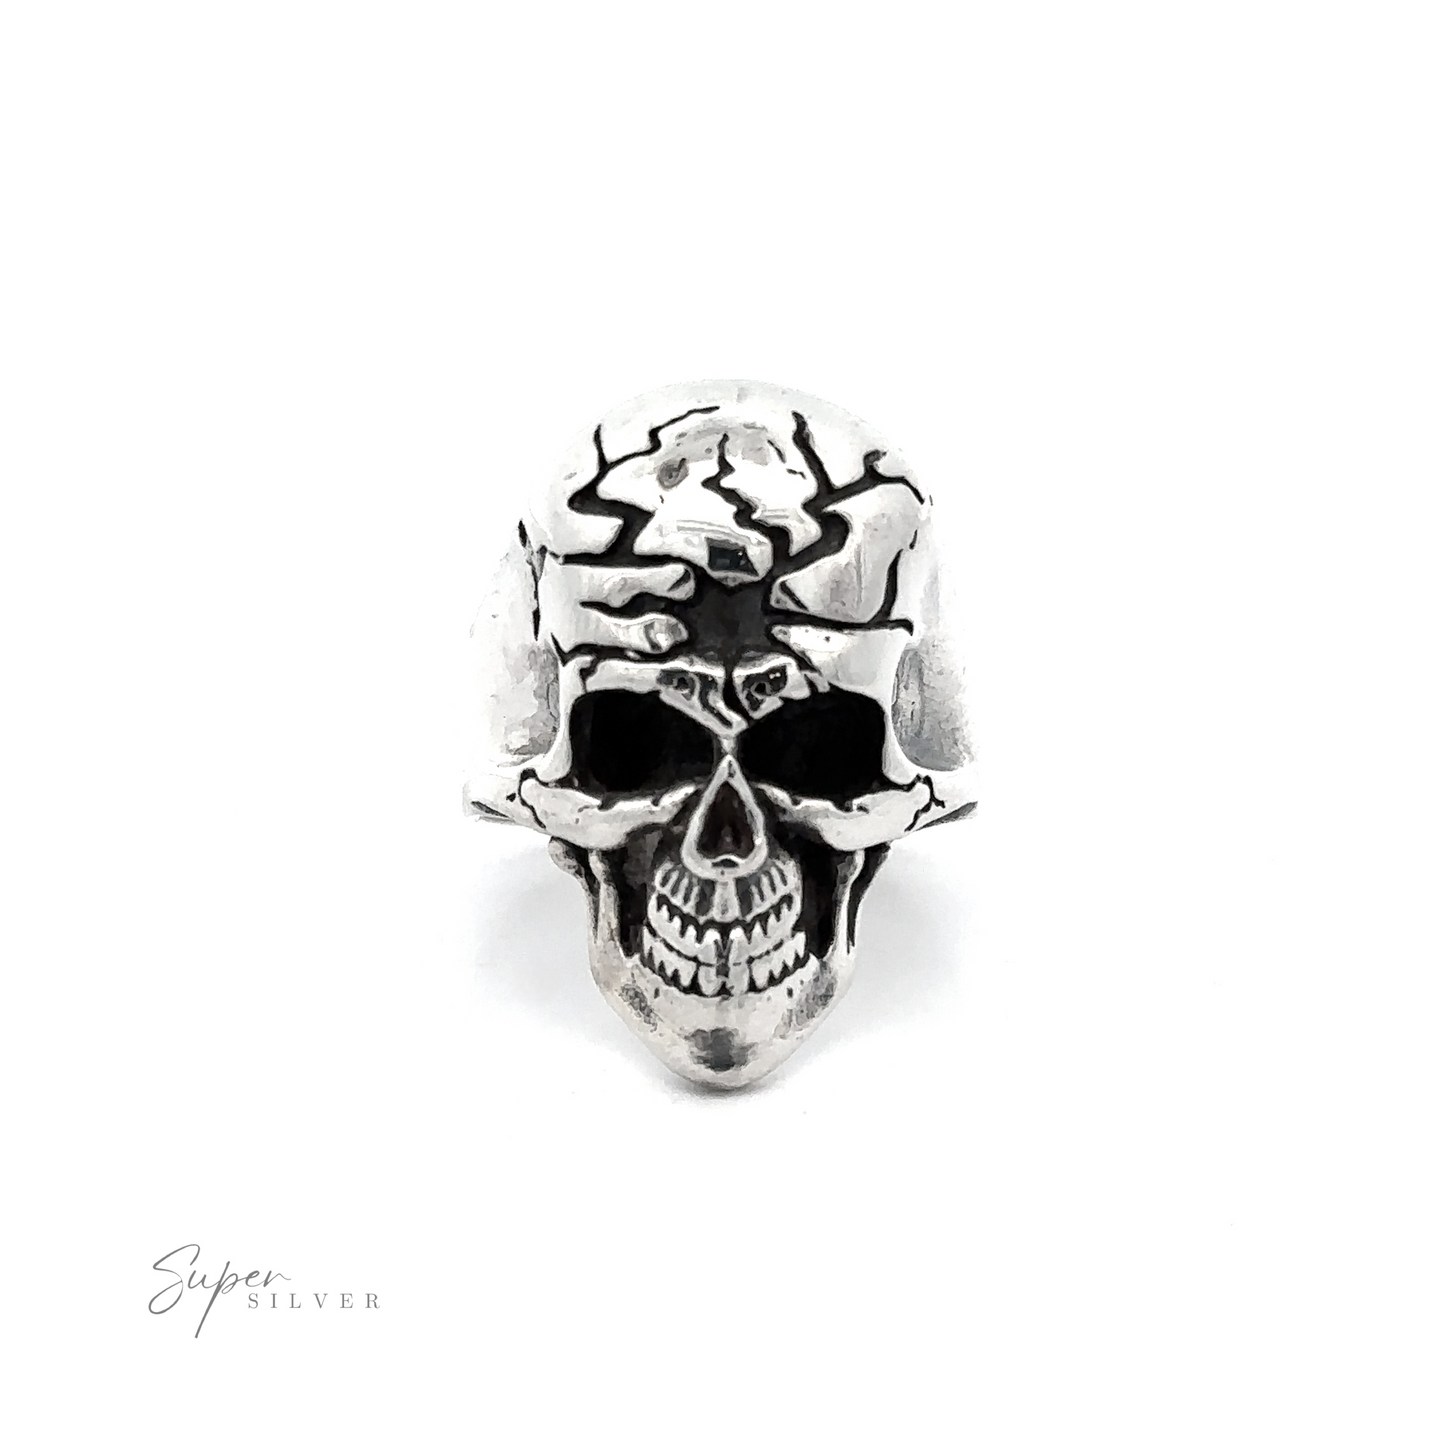 A silver ring shaped like a detailed skull with cracks and hollow eye sockets exudes edgy sophistication. "Super Silver" is written in small text at the bottom left corner. This Cracked Skull Statement Ring melds rebellious elegance with intricate craftsmanship, making it a standout accessory.